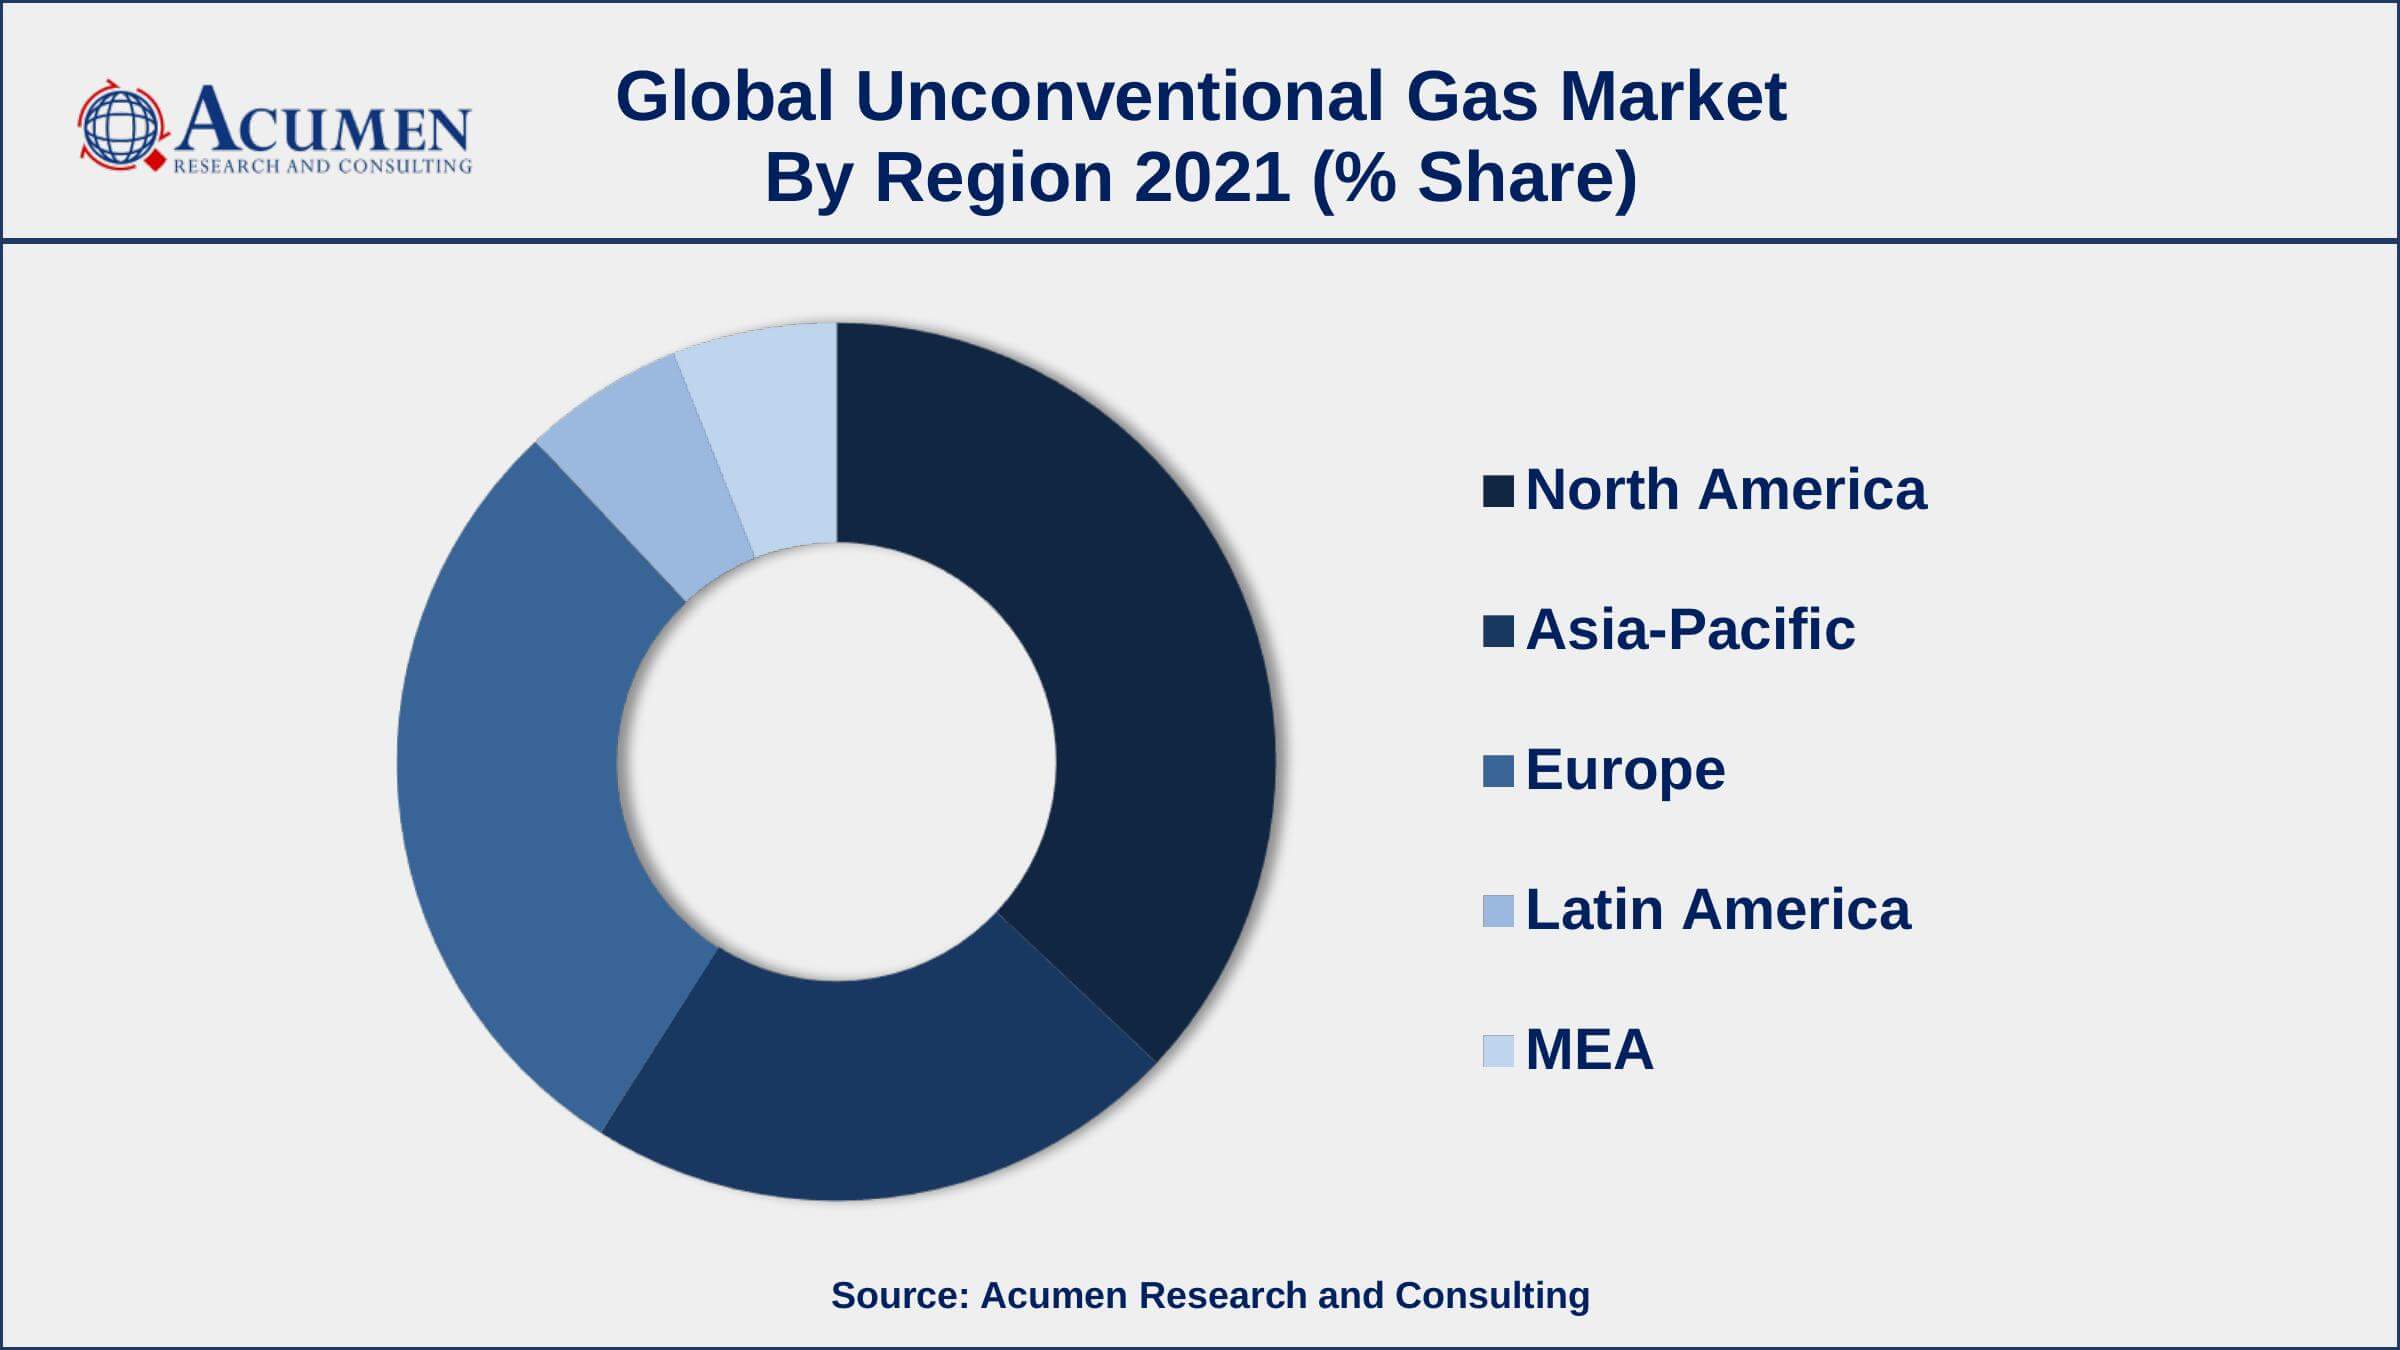 Increasing use of unconventional gases in the industrial sector, drives the unconventional gas market size